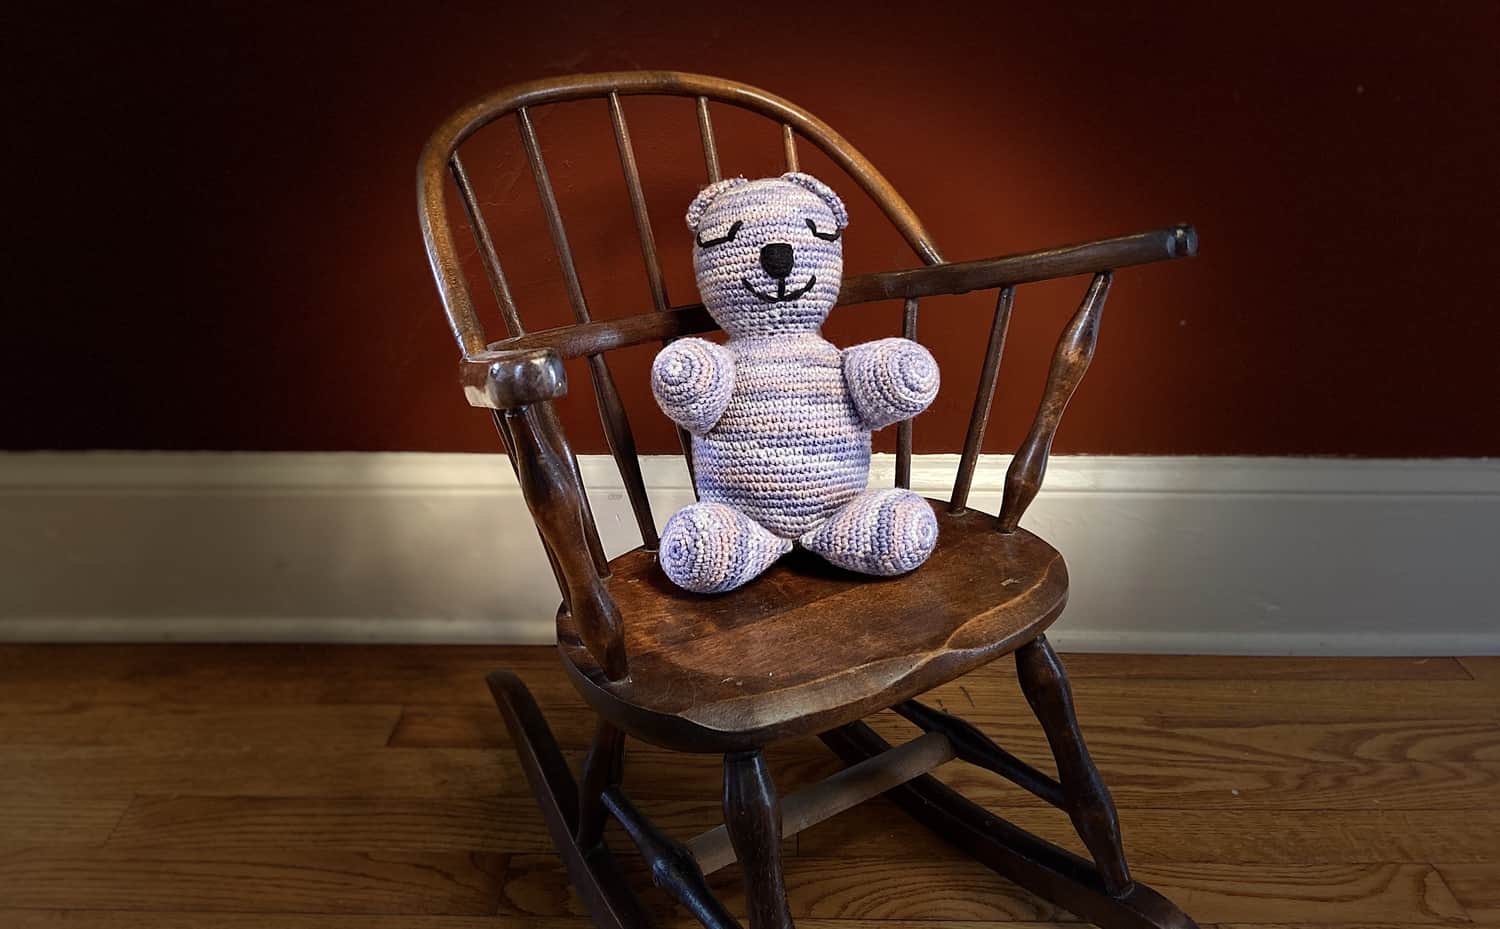 Bear sitting in a child's rocking chair.